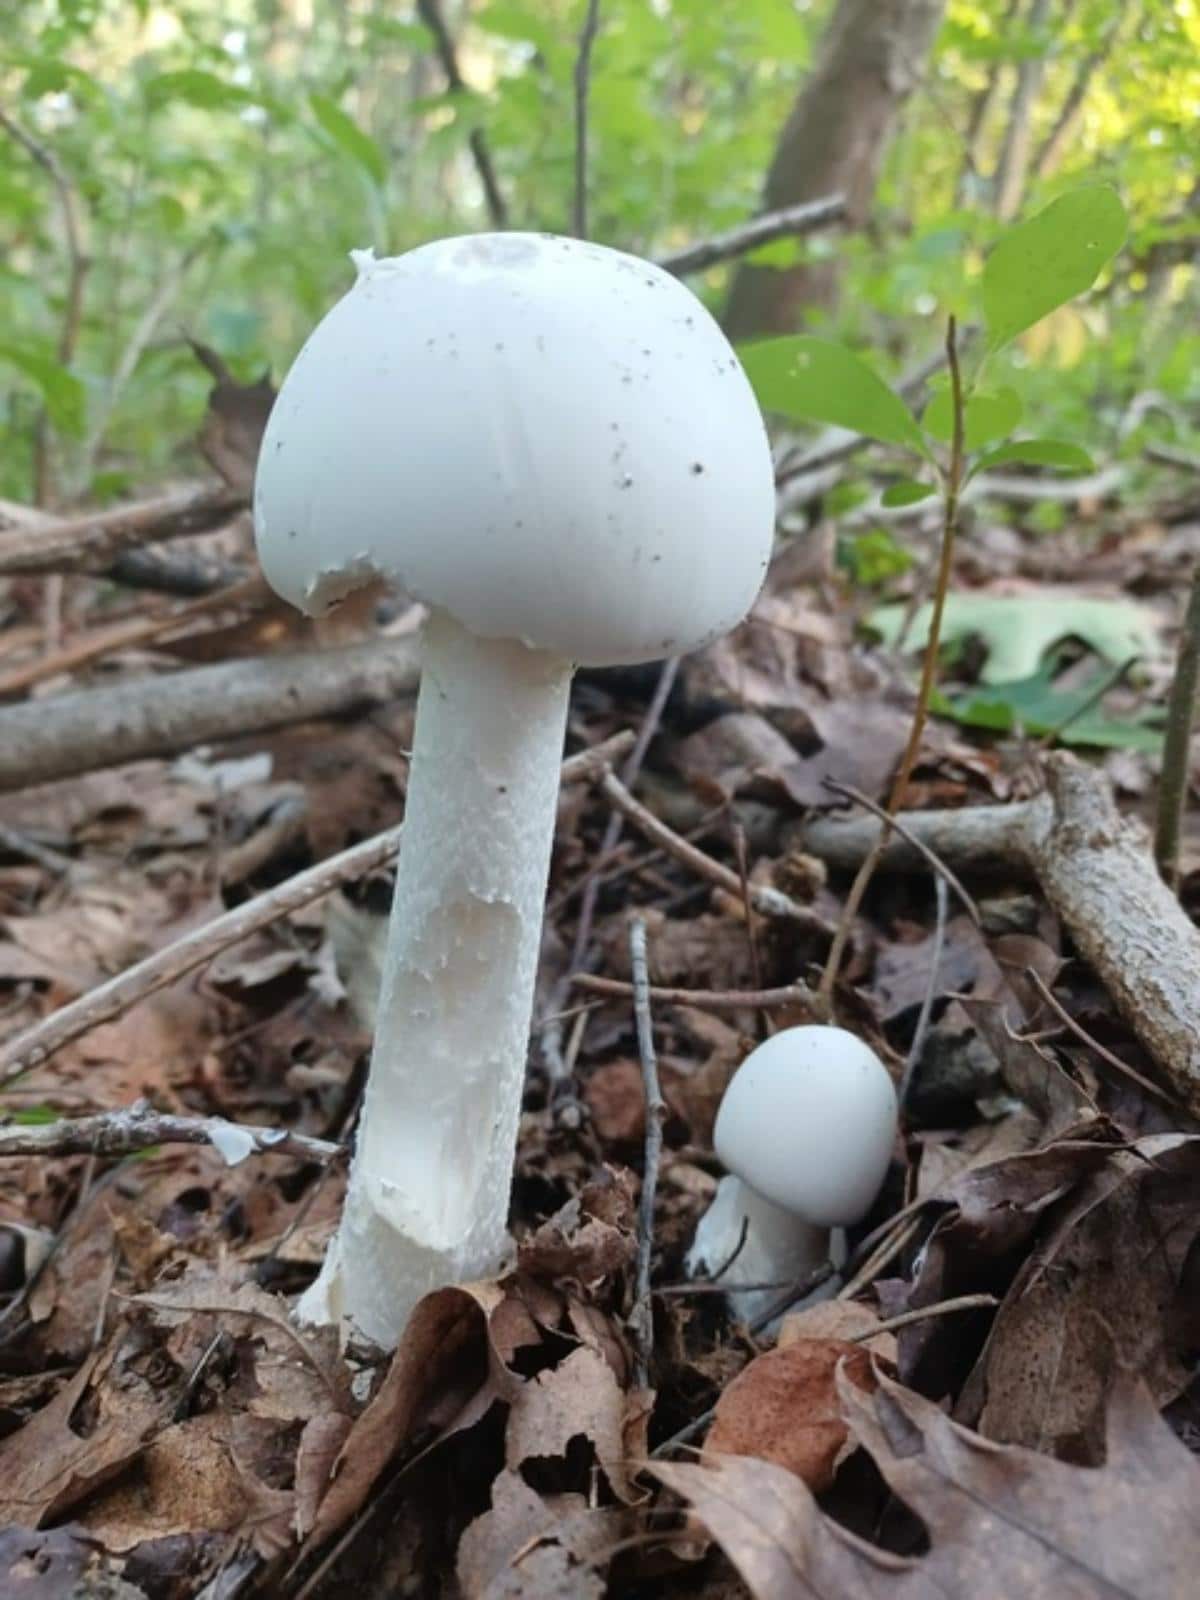 Destroying angel big and little